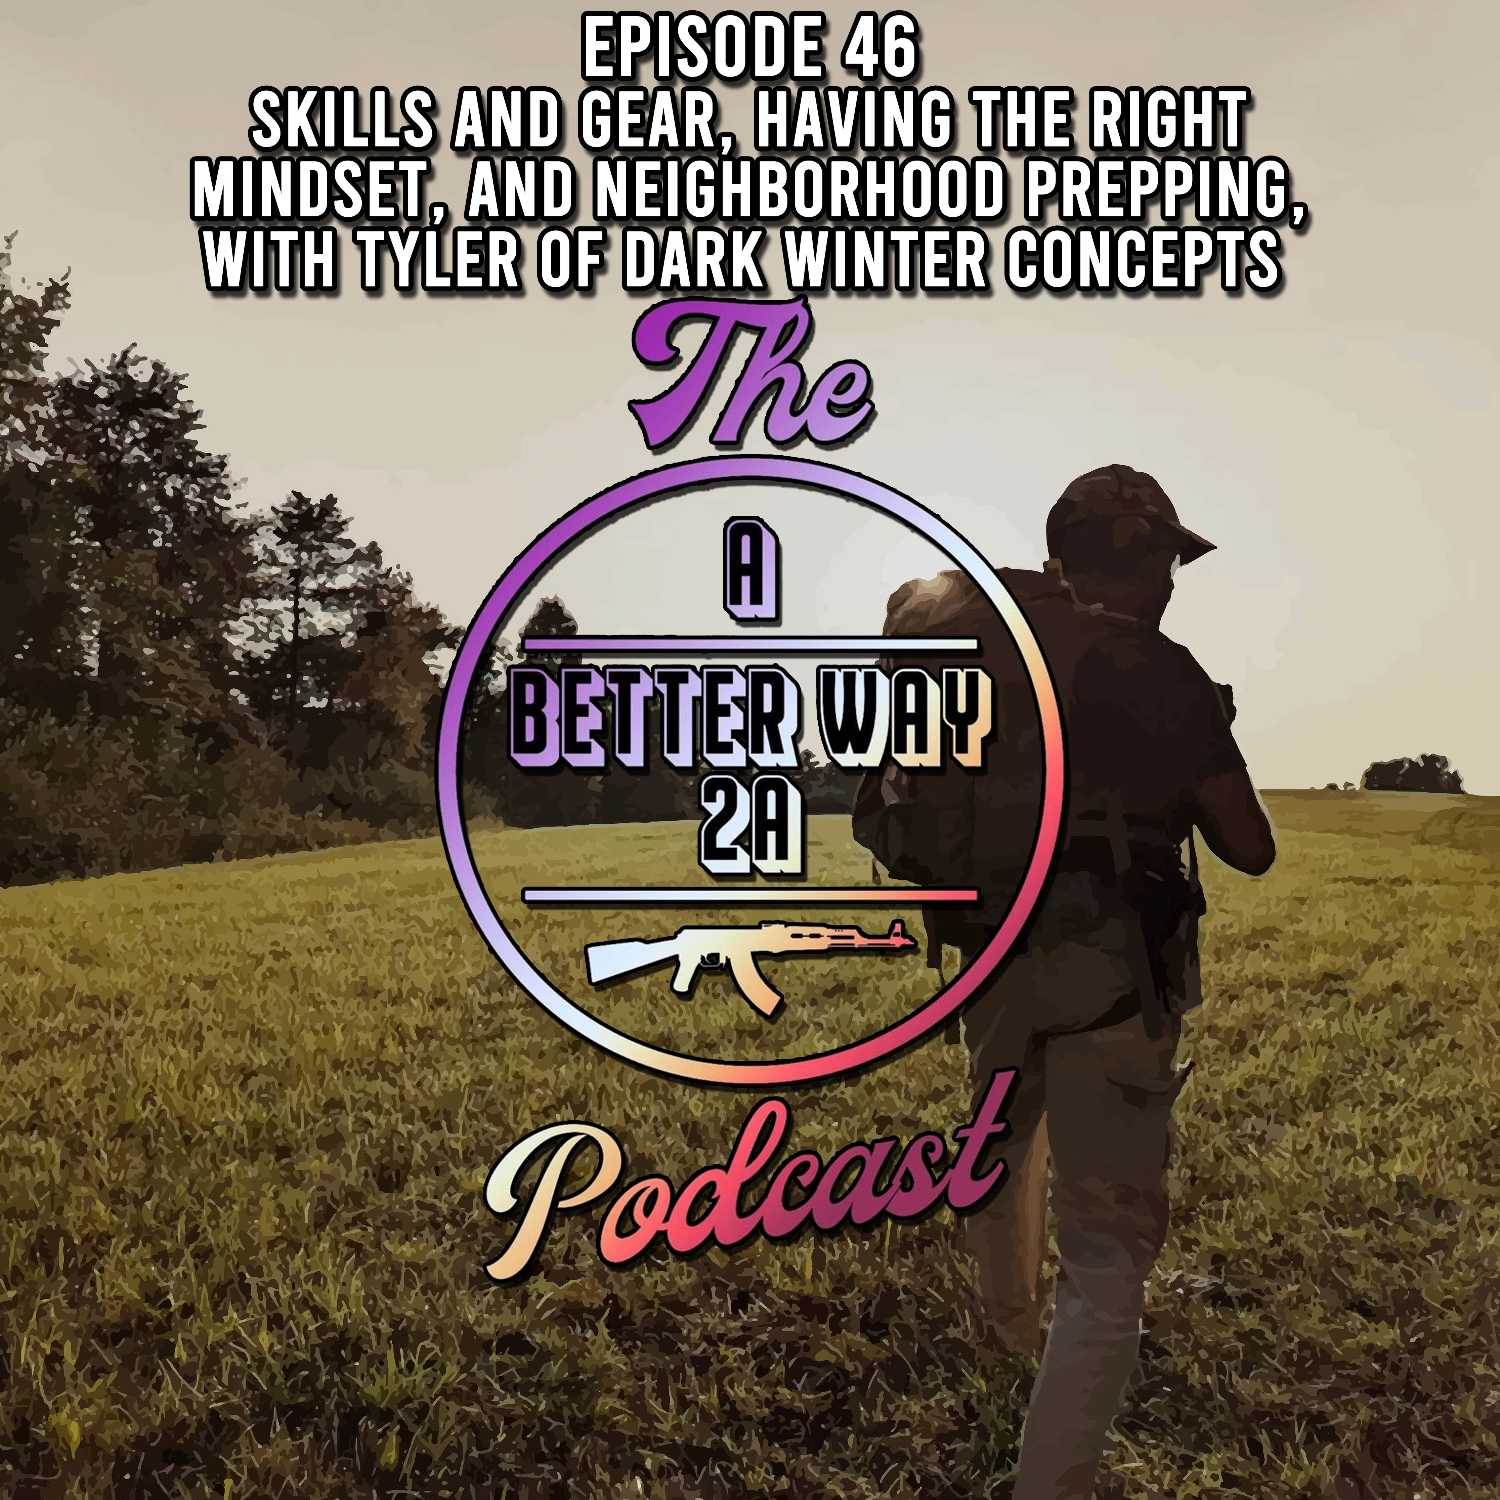 Episode 46 - Skills And Gear, Having The Right Mindset, And Neighborhood Prepping With Tyler Of Dark Winter Concepts